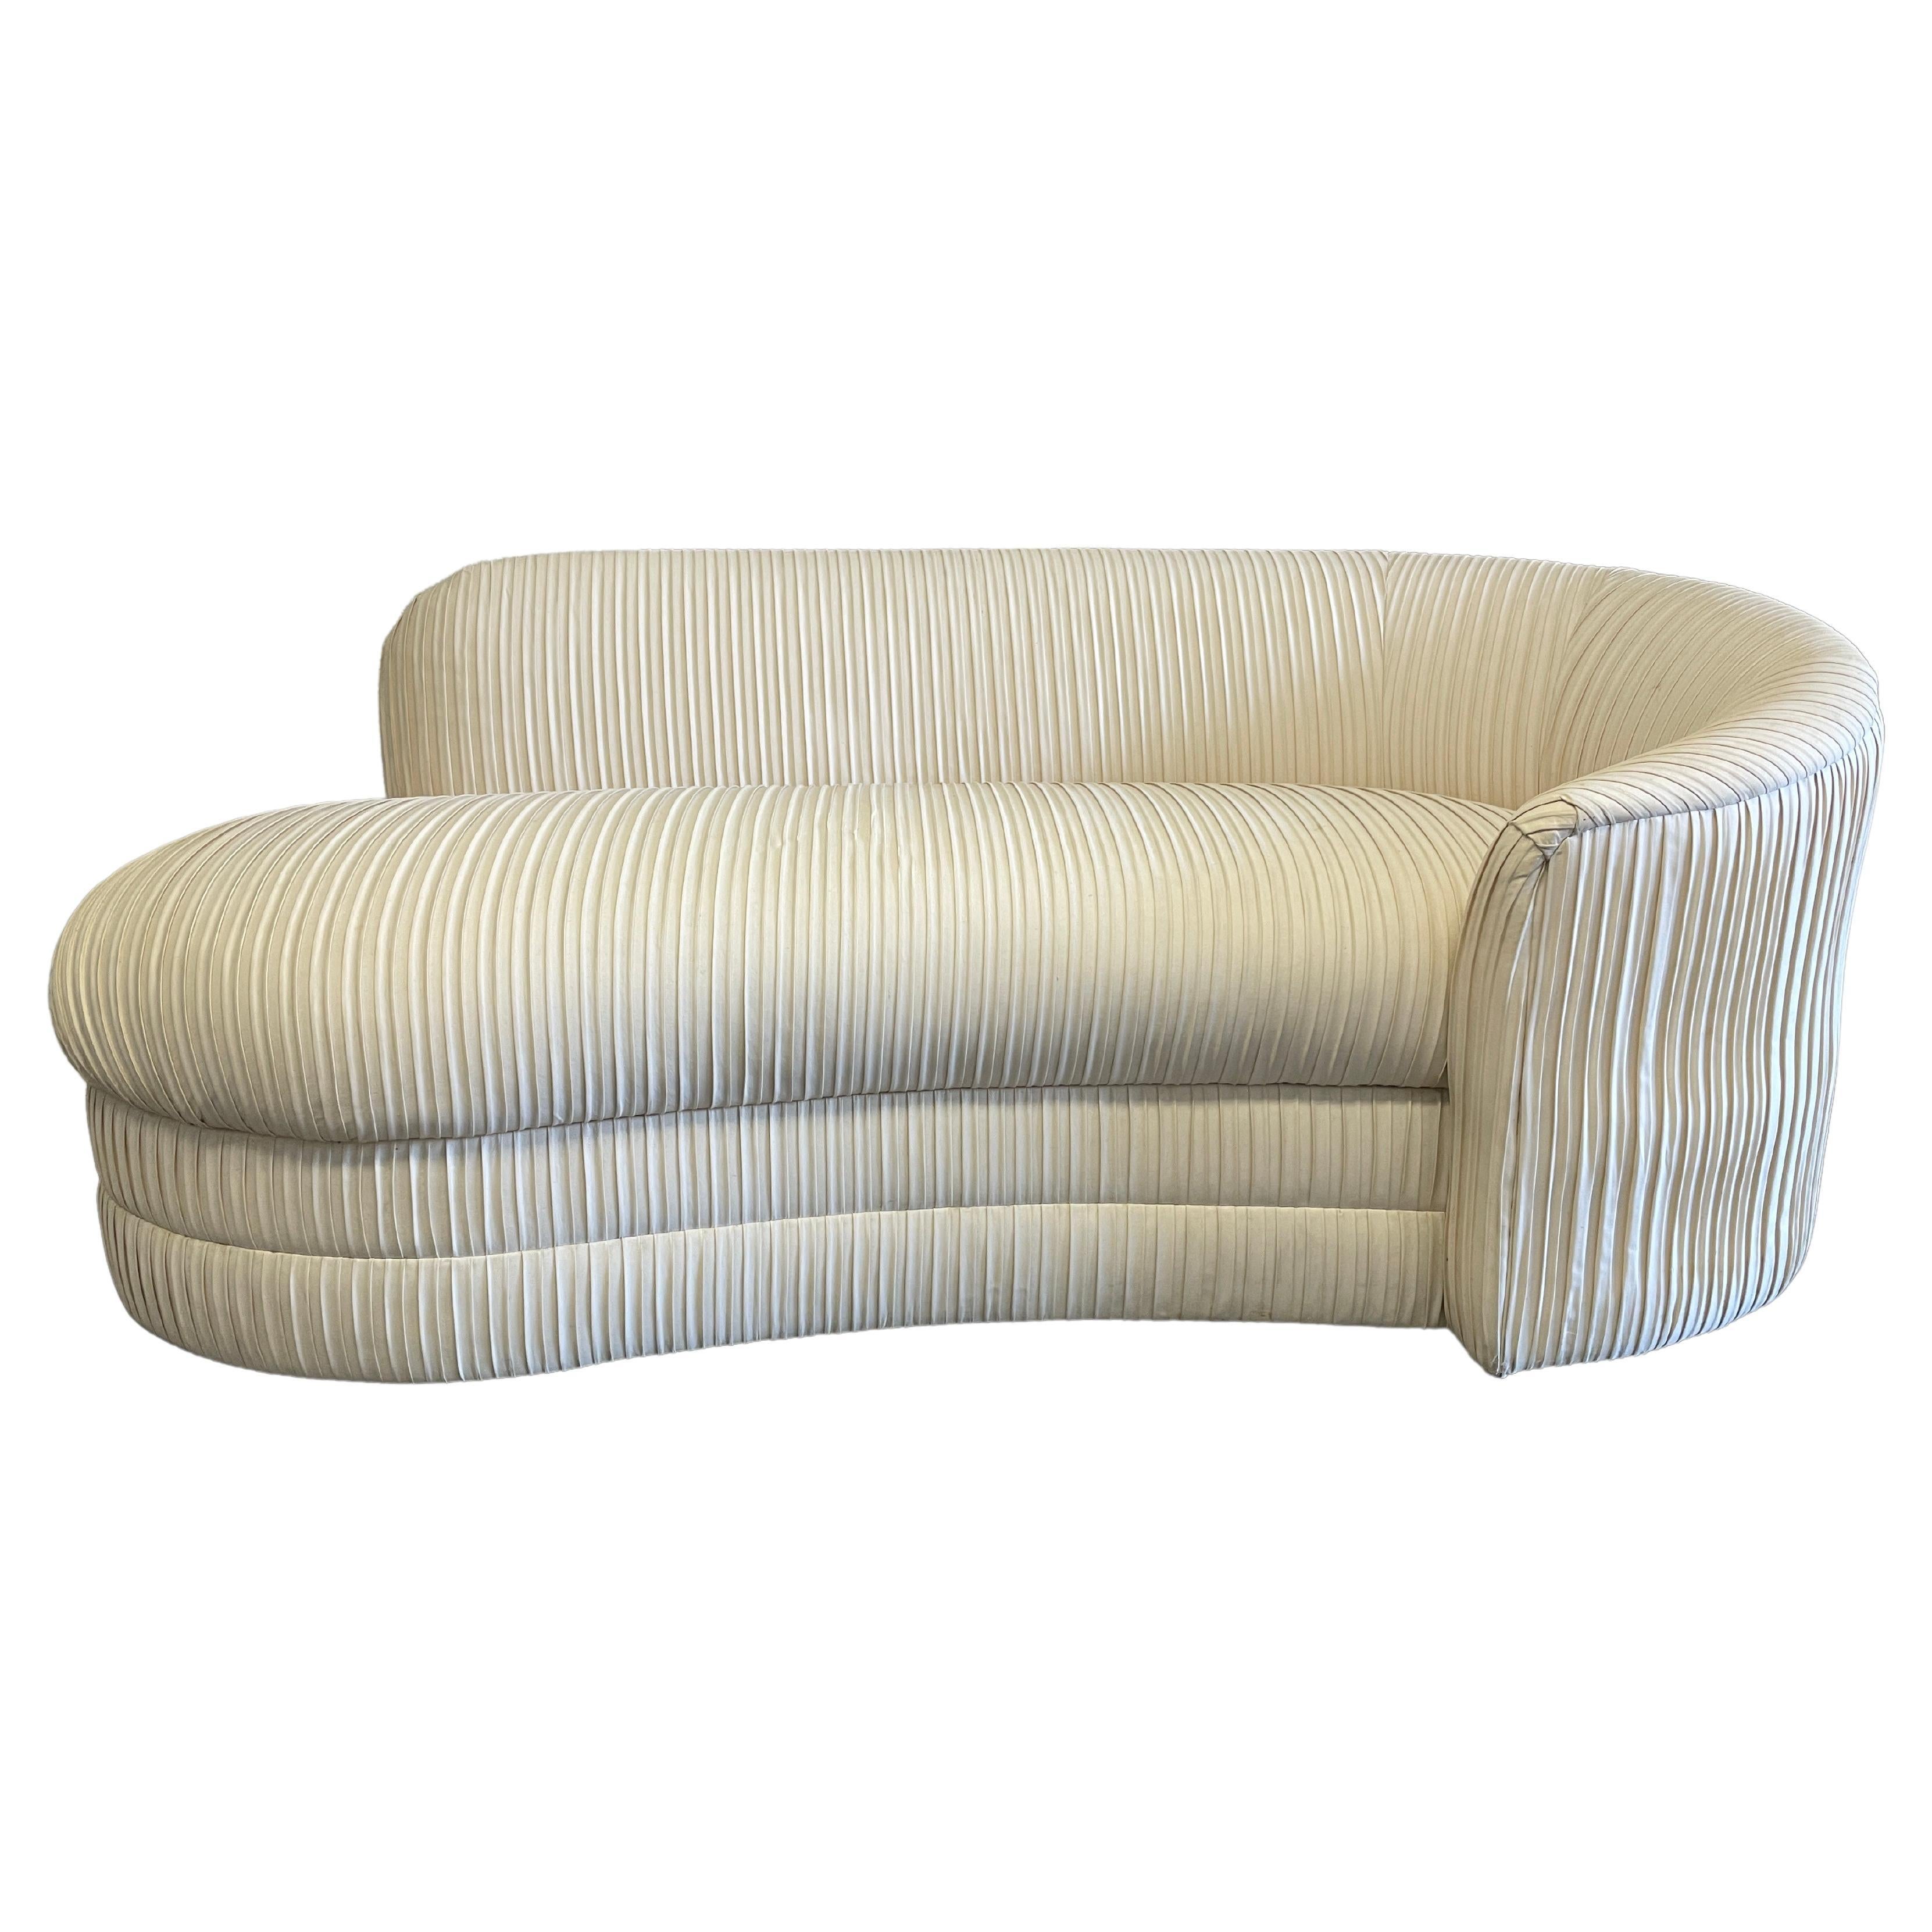 Midcentury Pleated Chaise Lounge Sofa couch